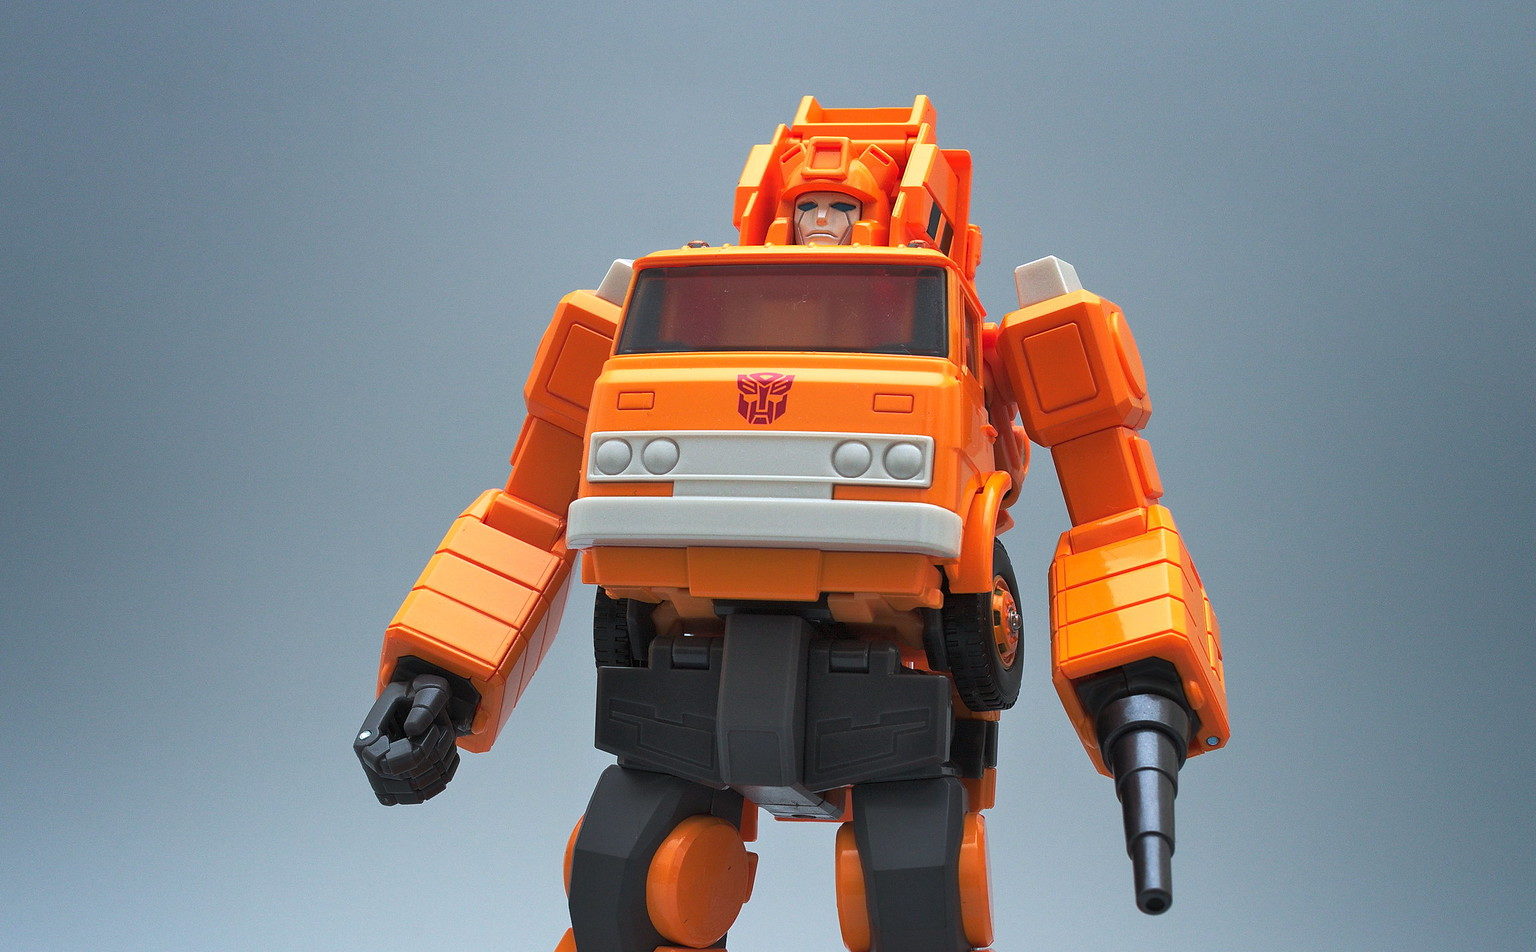 Orange Grapple with black wrist barrel attachment in replacement of his left fist